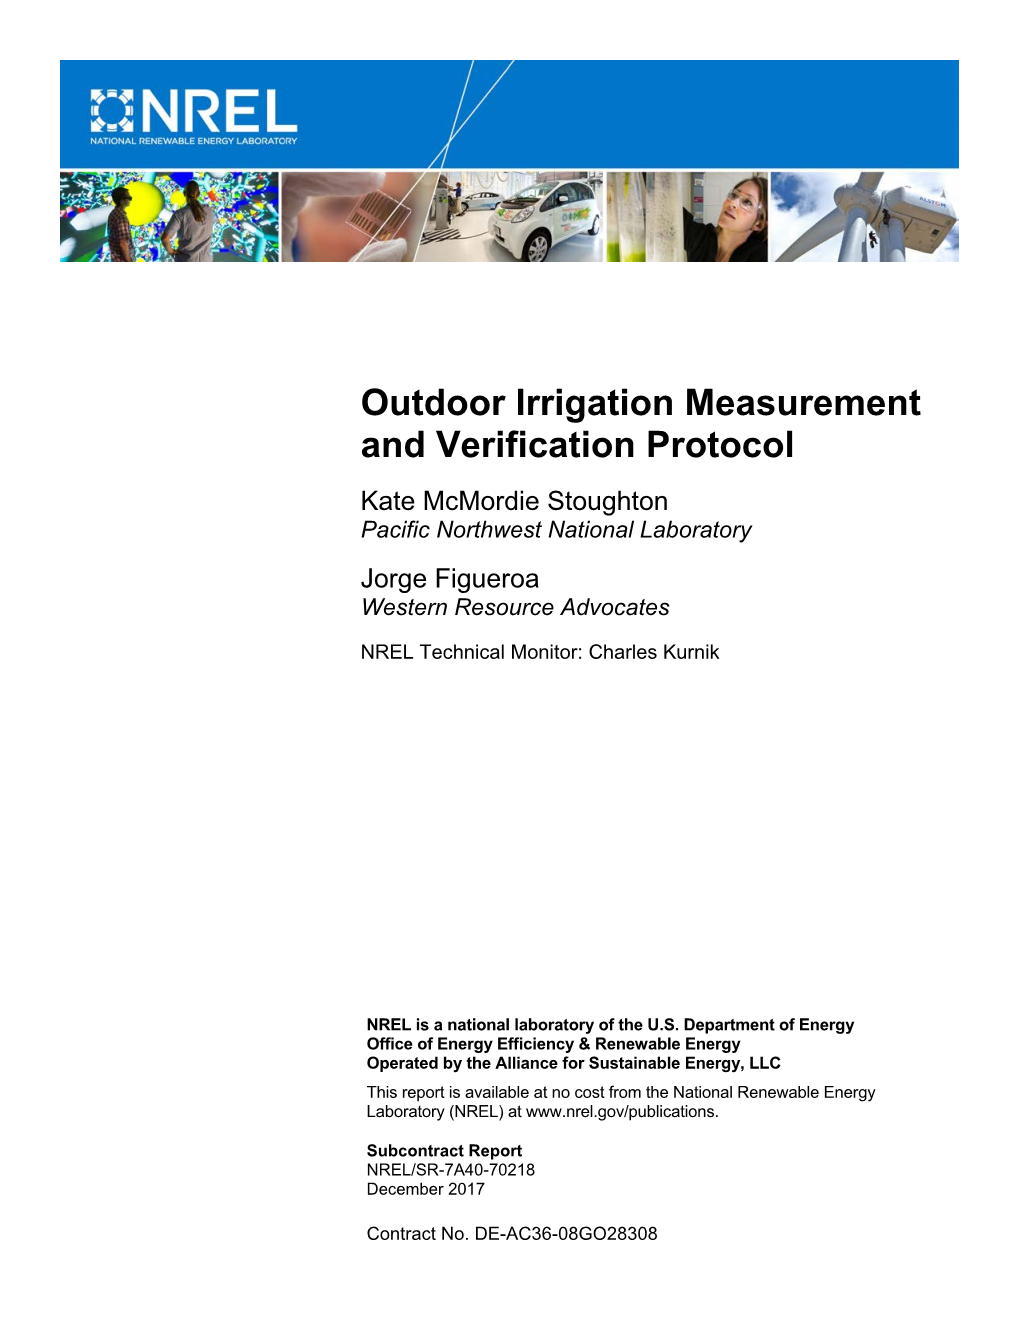 Outdoor Irrigation Measurement and Verification Protocol Kate Mcmordie Stoughton Pacific Northwest National Laboratory Jorge Figueroa Western Resource Advocates